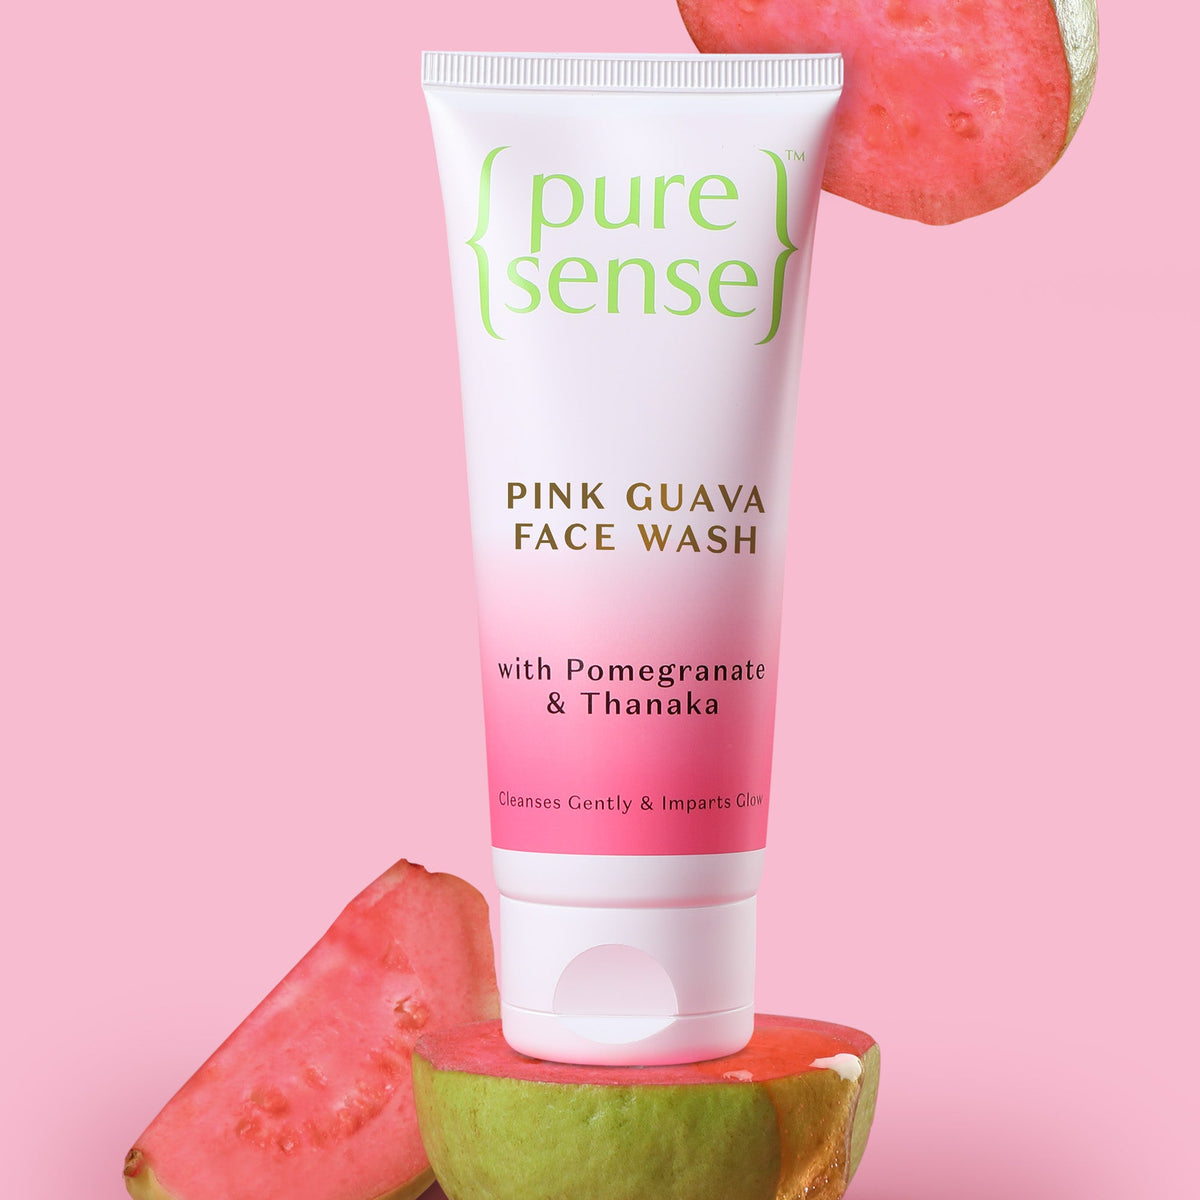 [CRED] Pink Guava Face Wash | From the makers of Parachute Advansed | 100ml